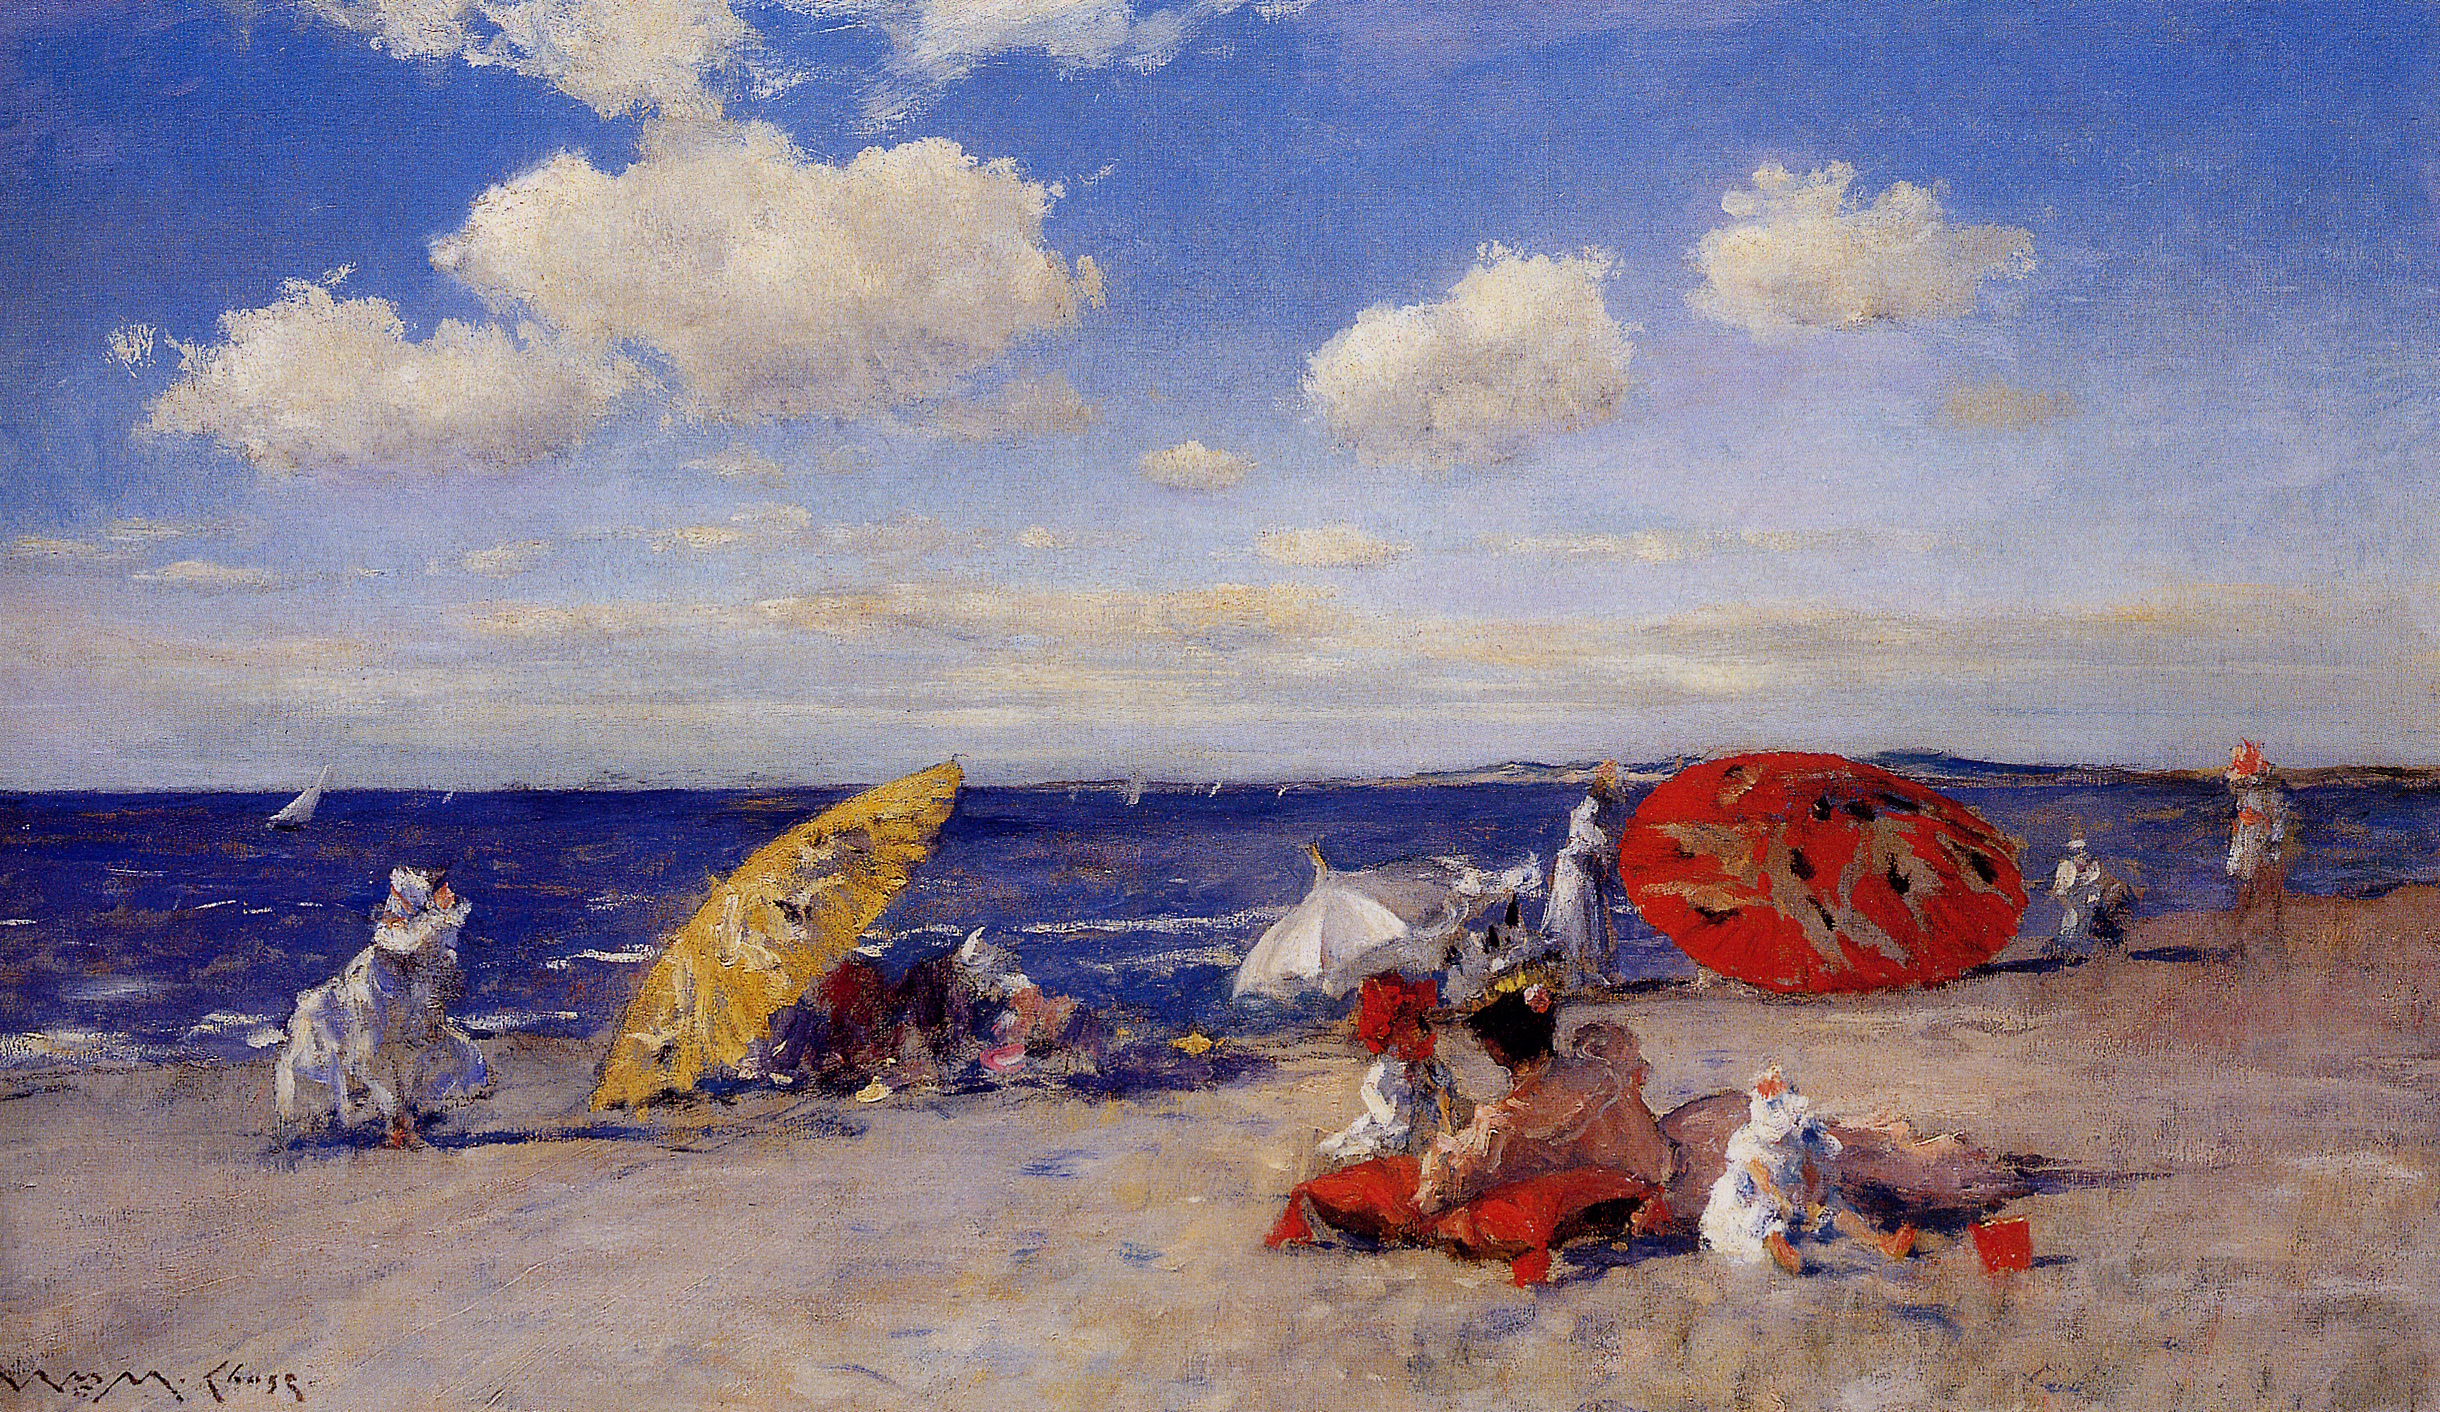 "At The Seaside," by William Merritt Chase.